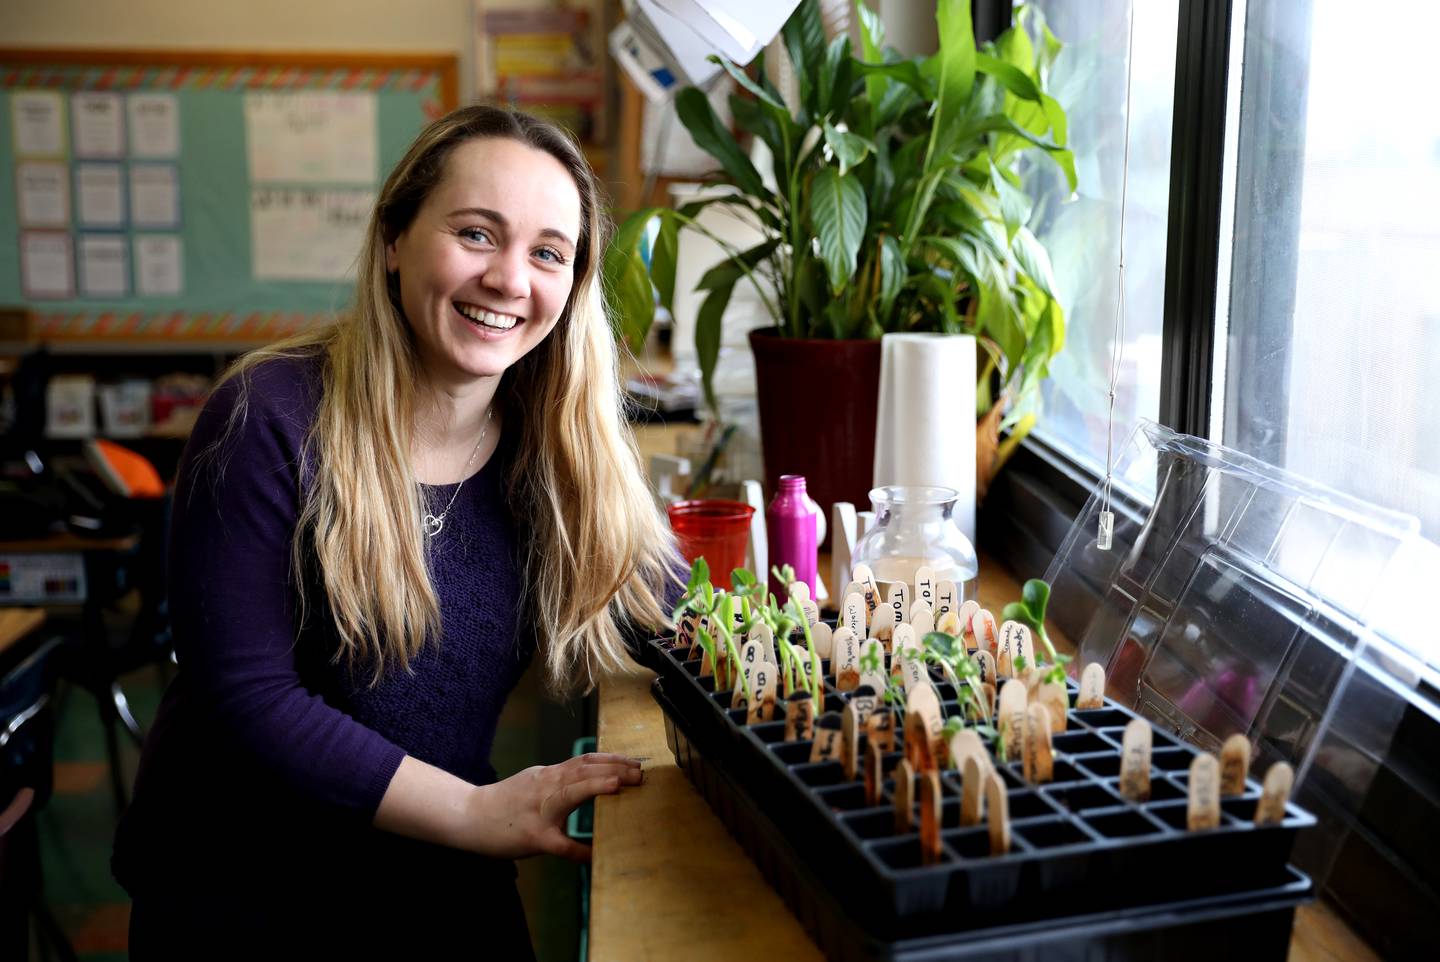 Anna Pagdin, a fifth grade teacher at Sacred Heart School in Lombard, has helped start a student garden at the school.